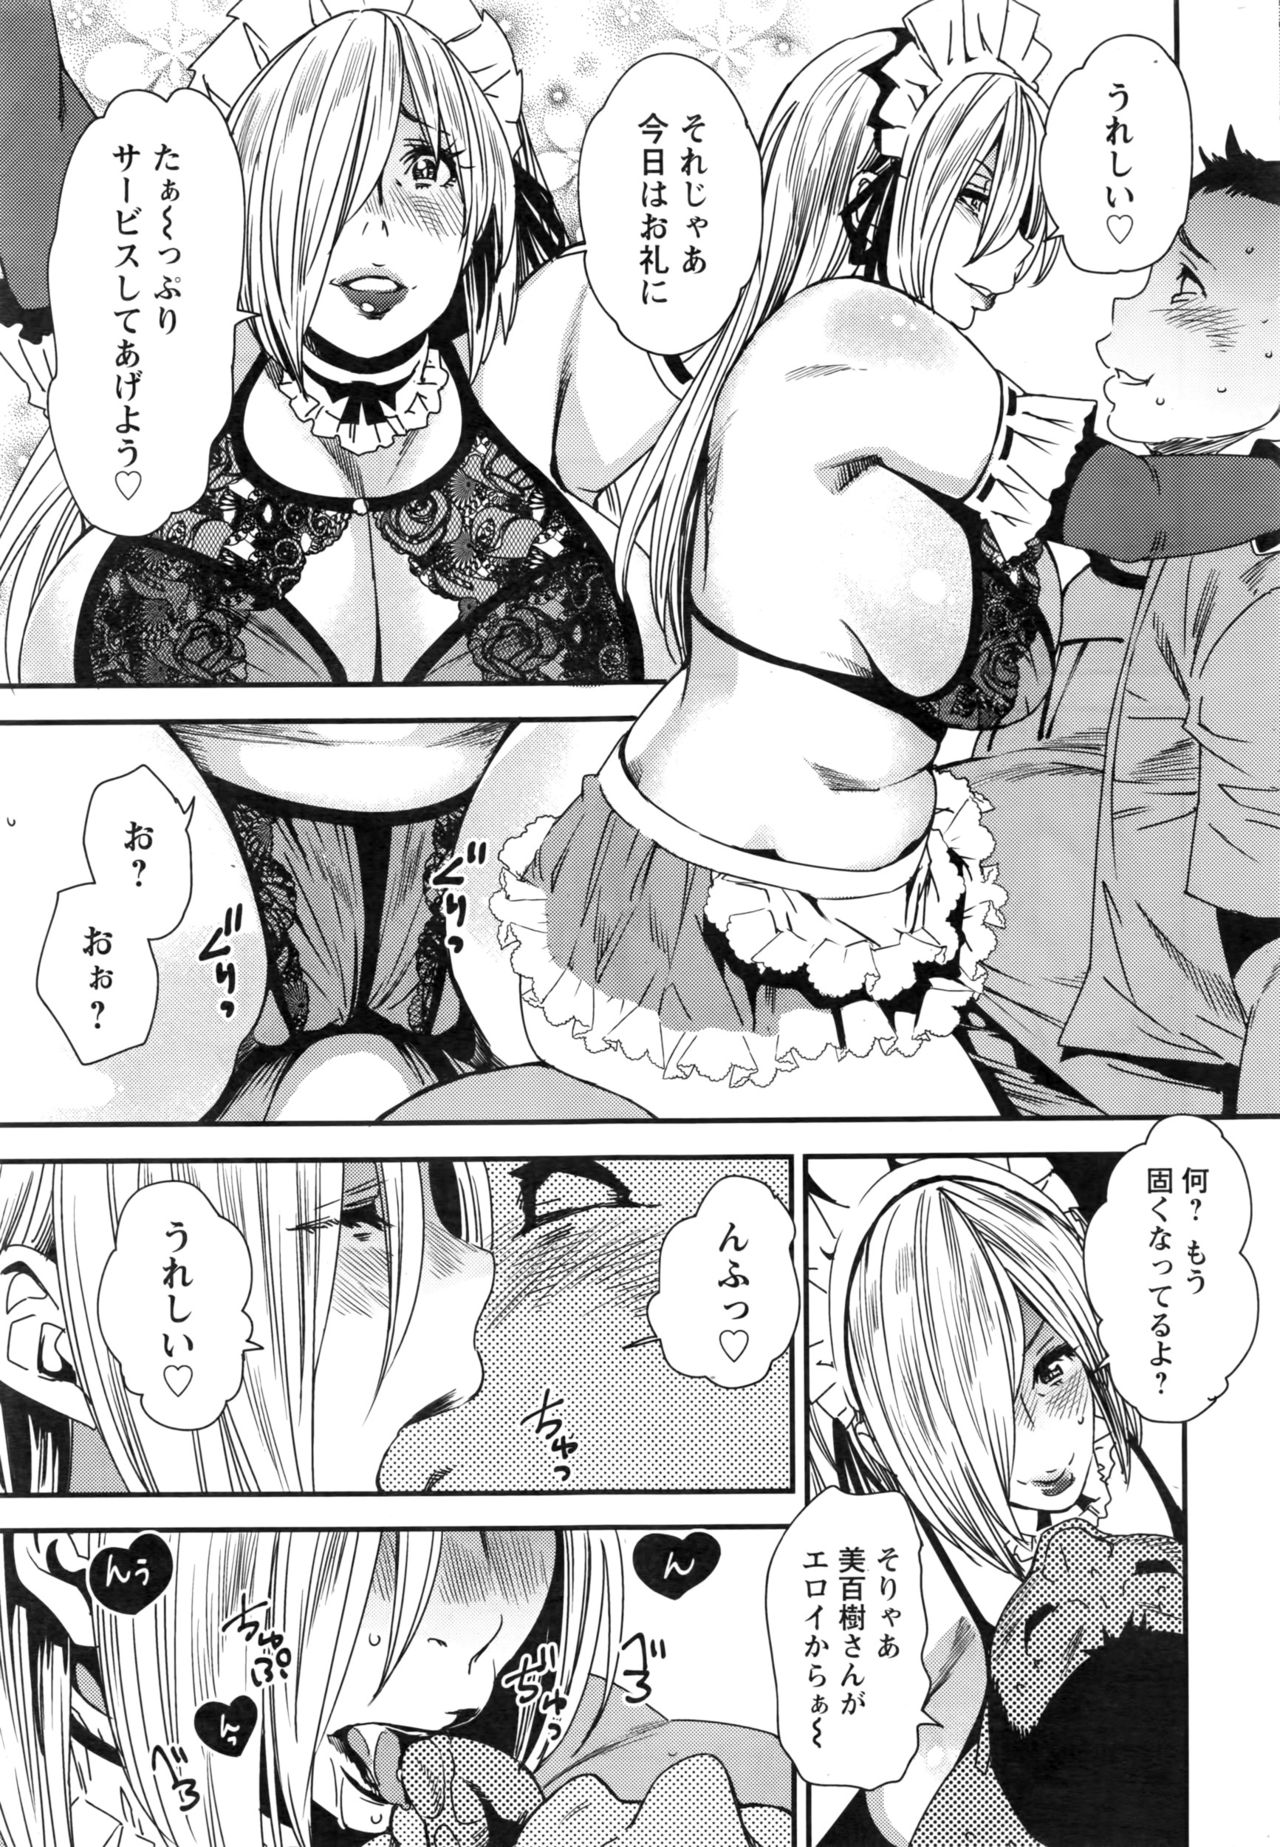 Action Pizazz 2016-10 page 36 full